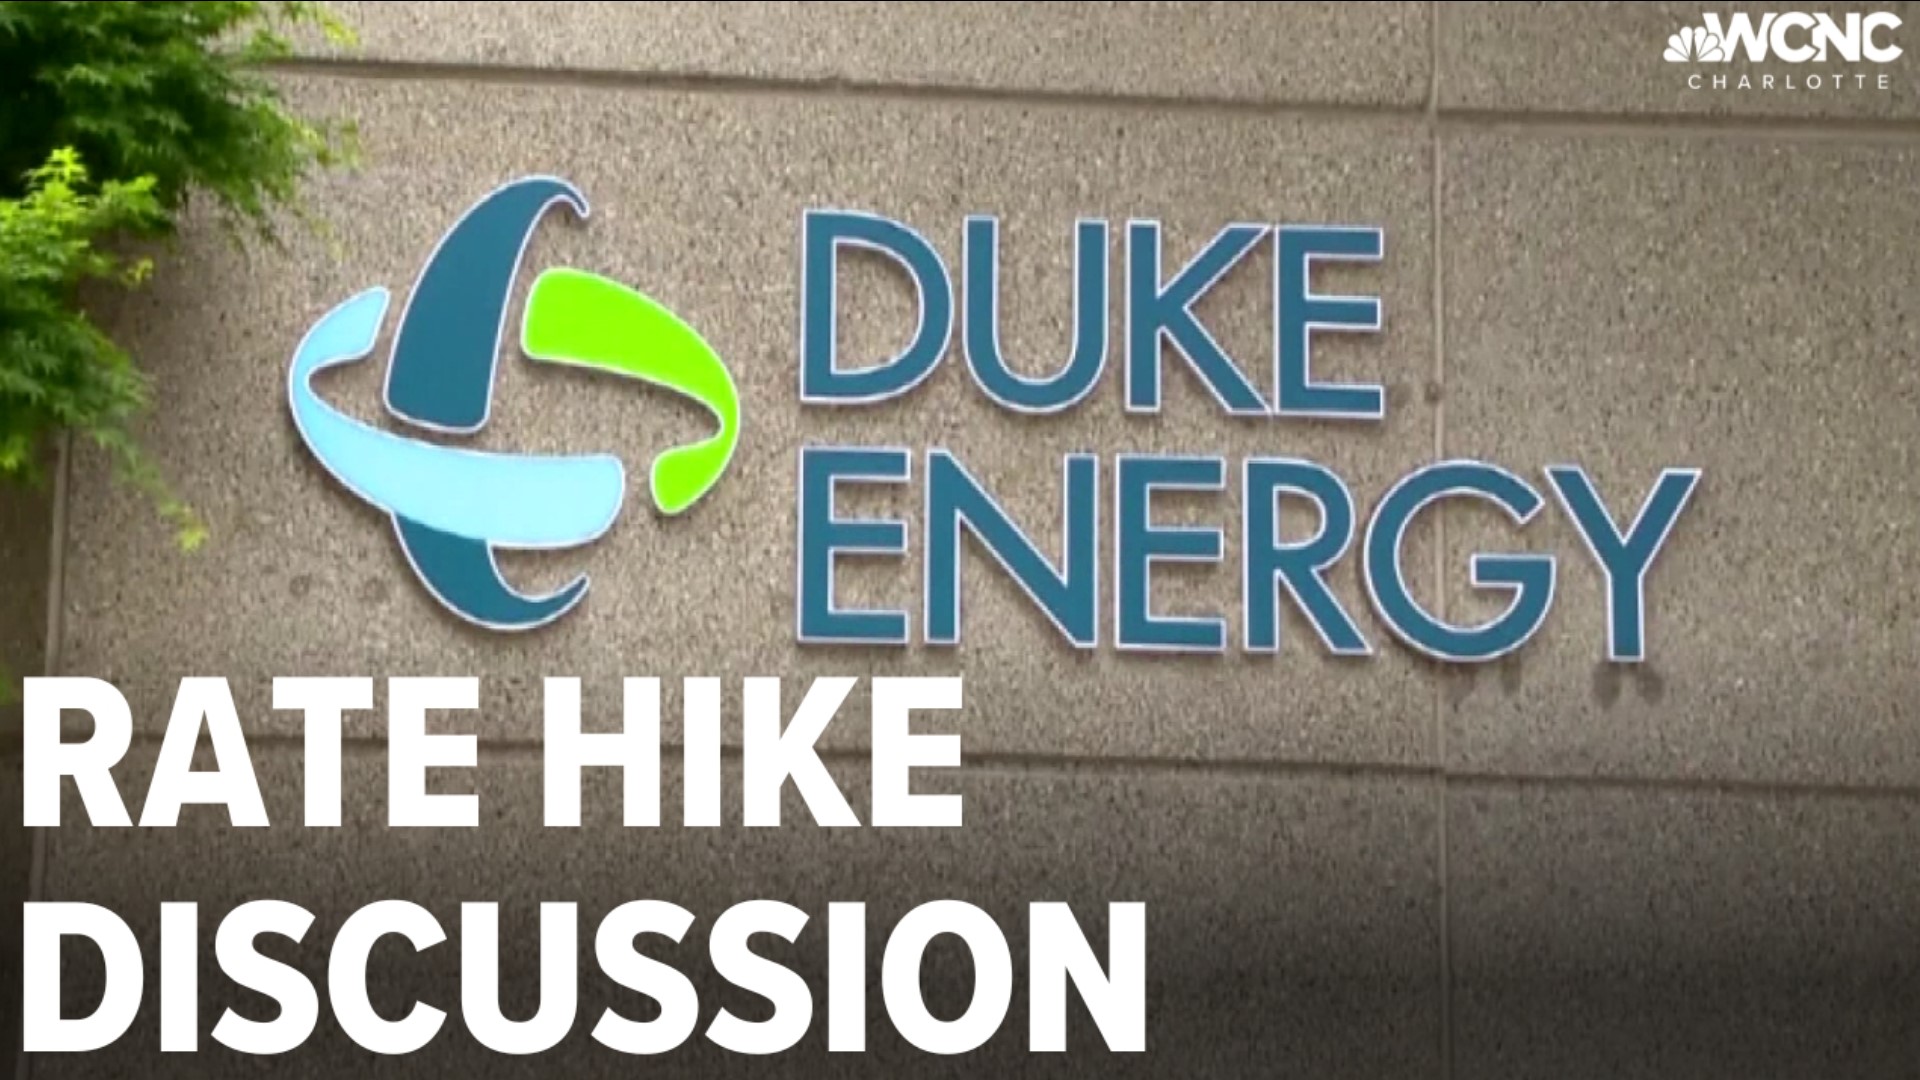 duke-energy-plans-to-raise-electricity-rates-in-north-carolina-wcnc